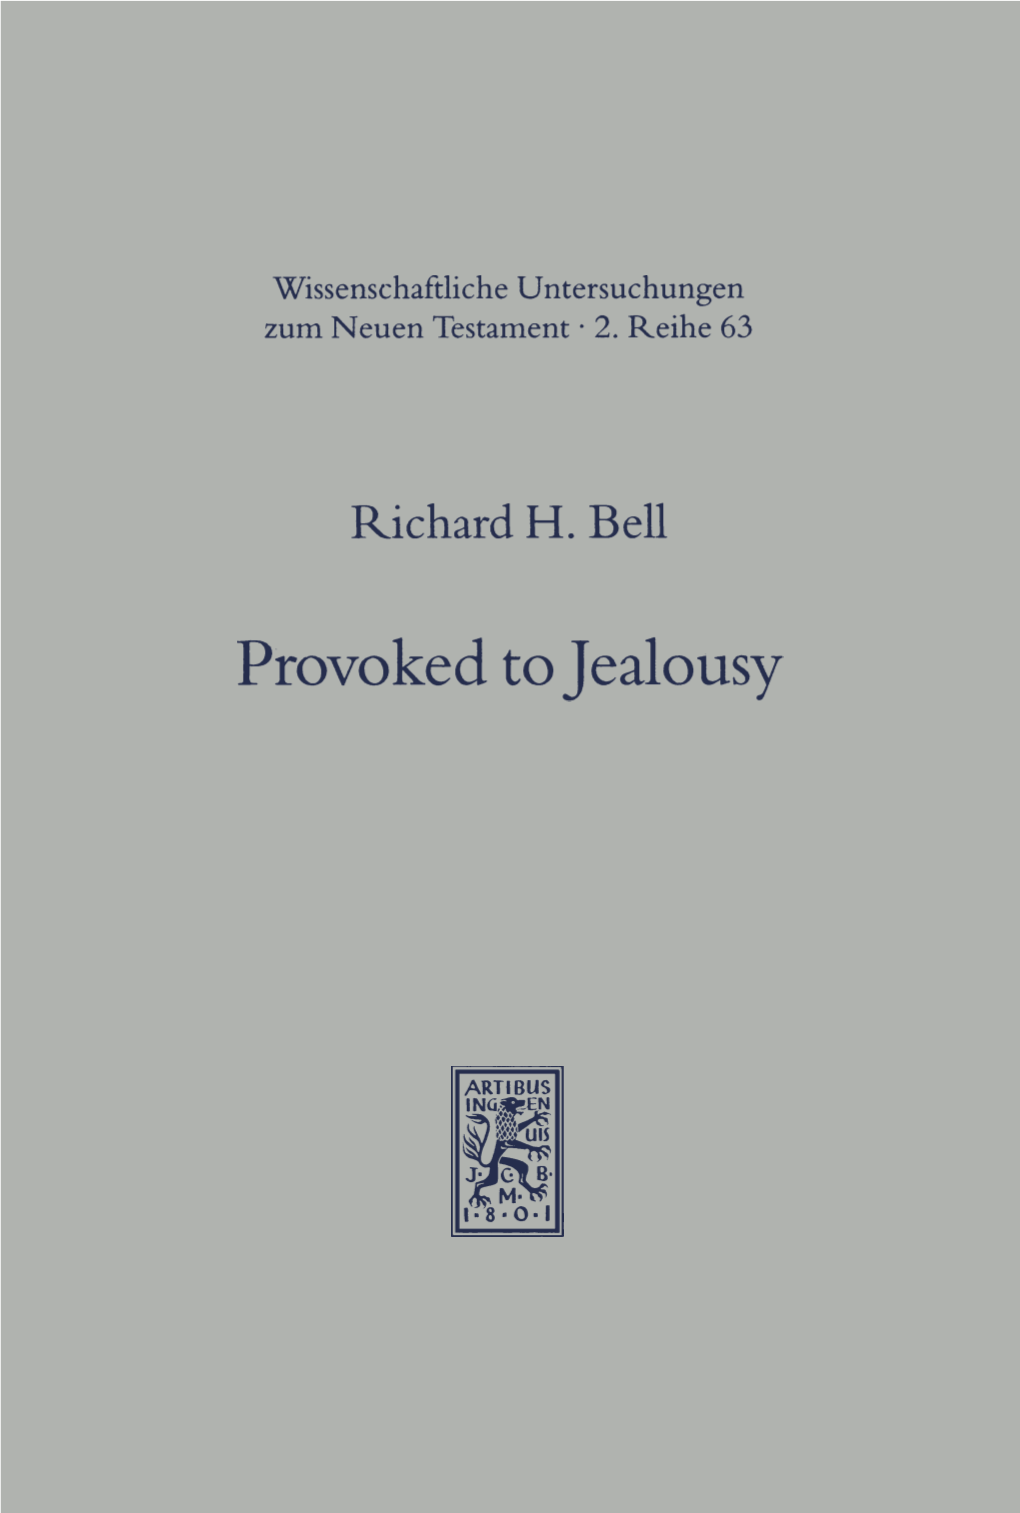 Provoked to Jealousy the Origin and Purpose of the Jealousy Motif in Romans 9-11